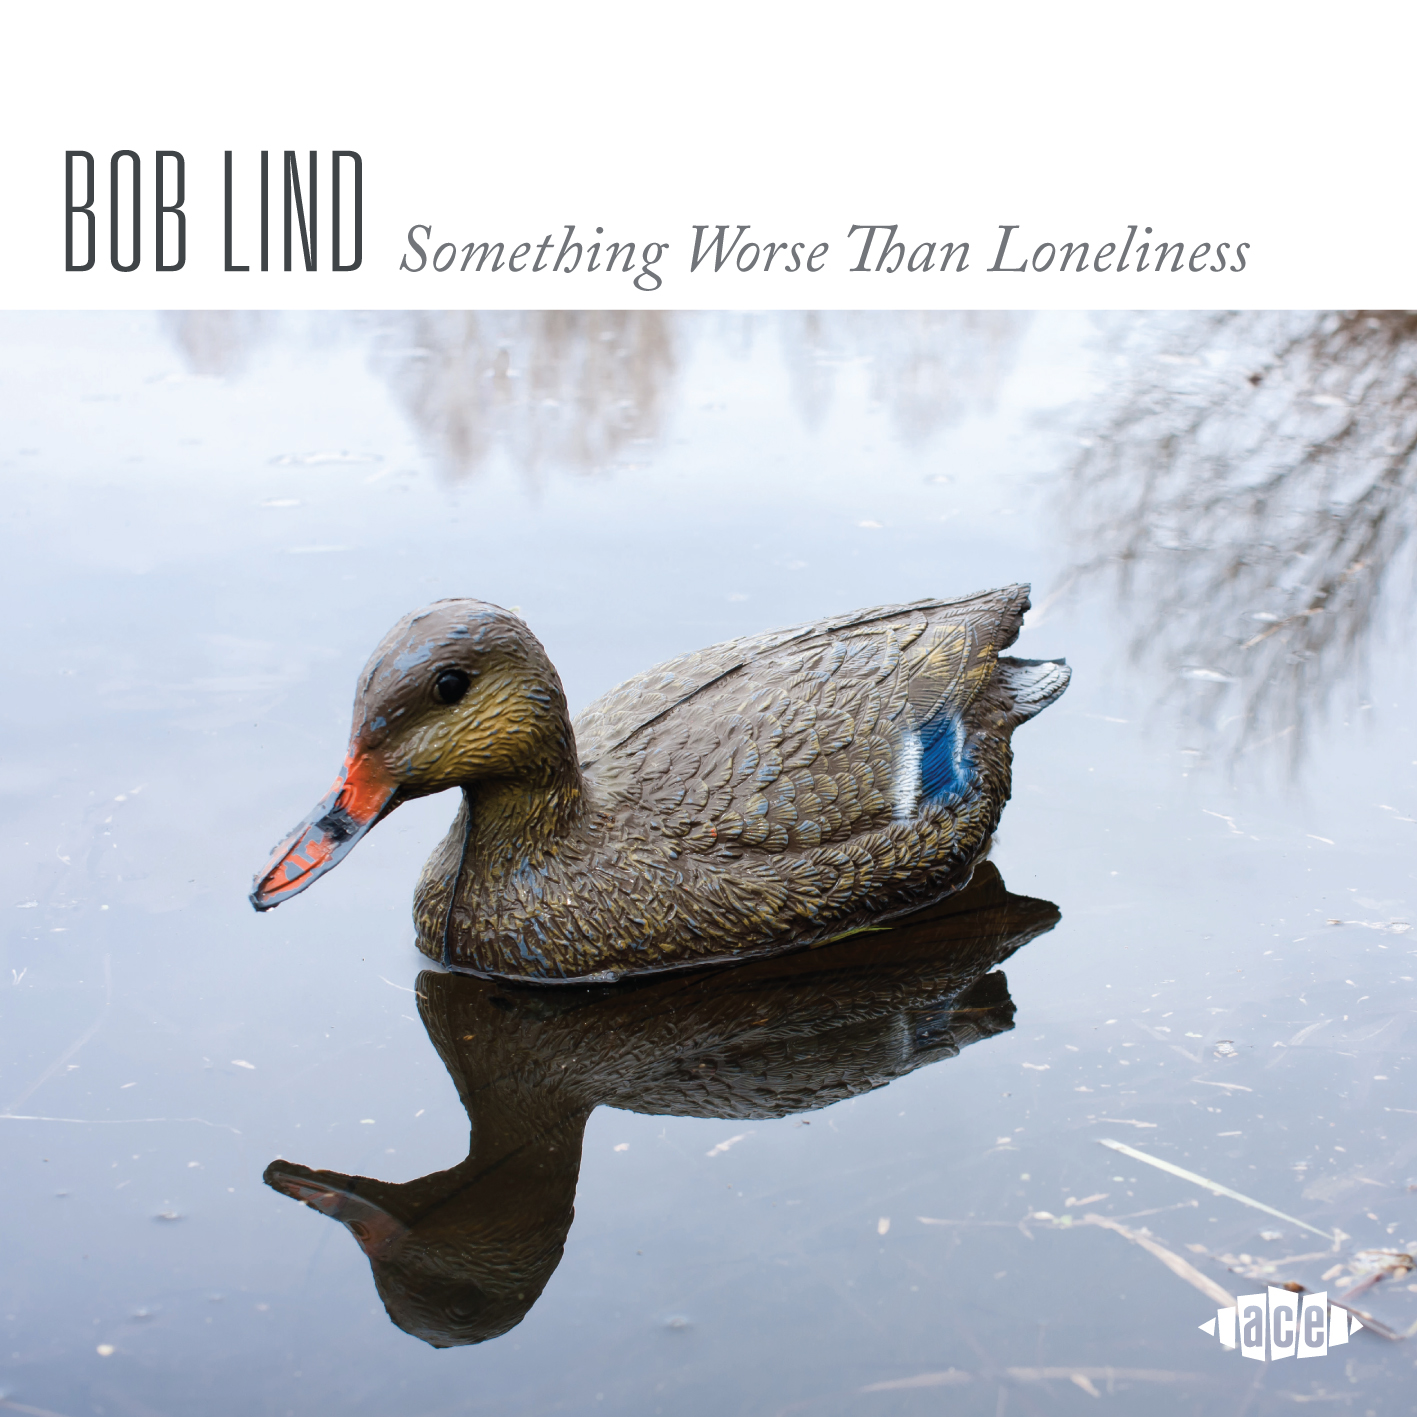 Album cover showing a duck floating peacefully on a pond. Peaceful, until you realize it's a hunter's decoy.